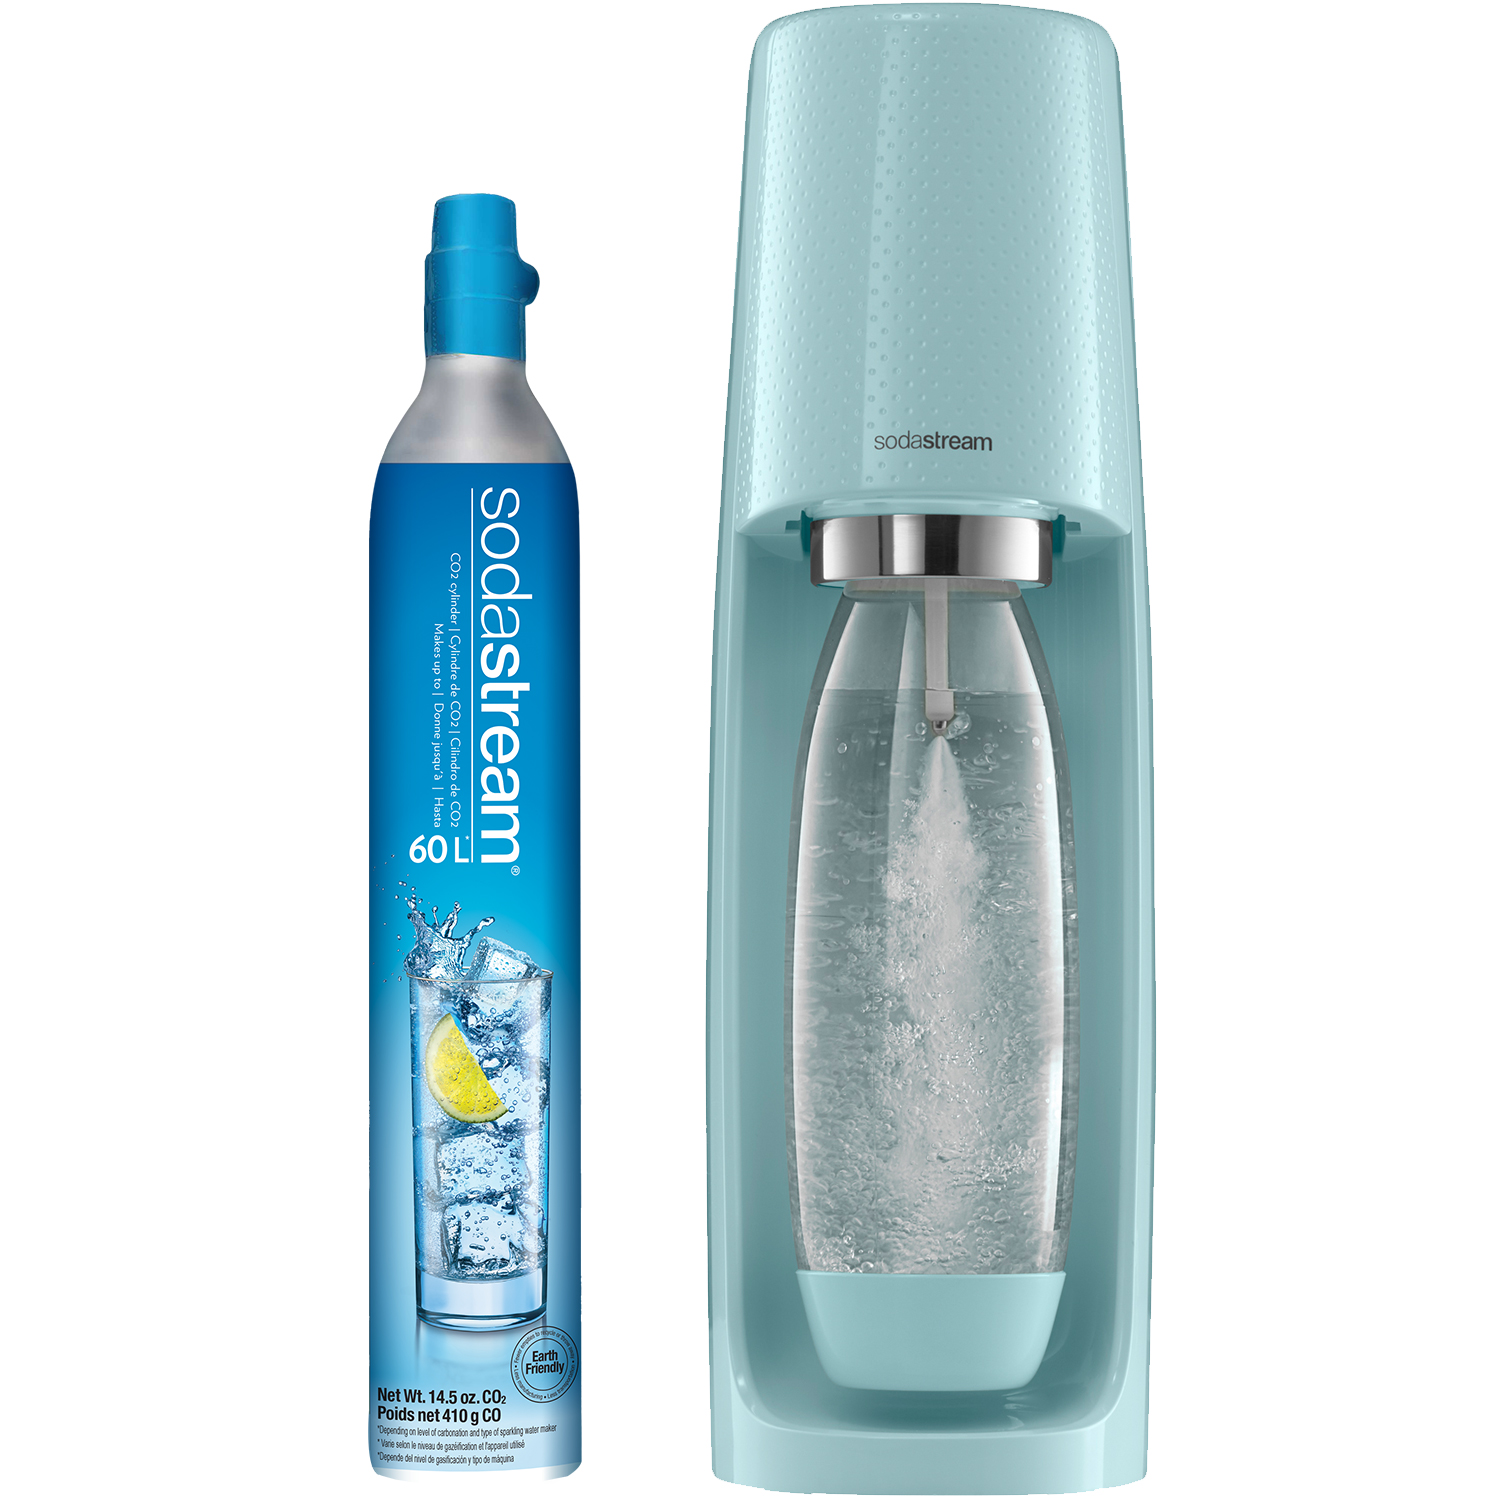 SodaStream Fizzi Sparkling Water Maker (Icy Blue) with CO2 and BPA free Bottle - image 1 of 6